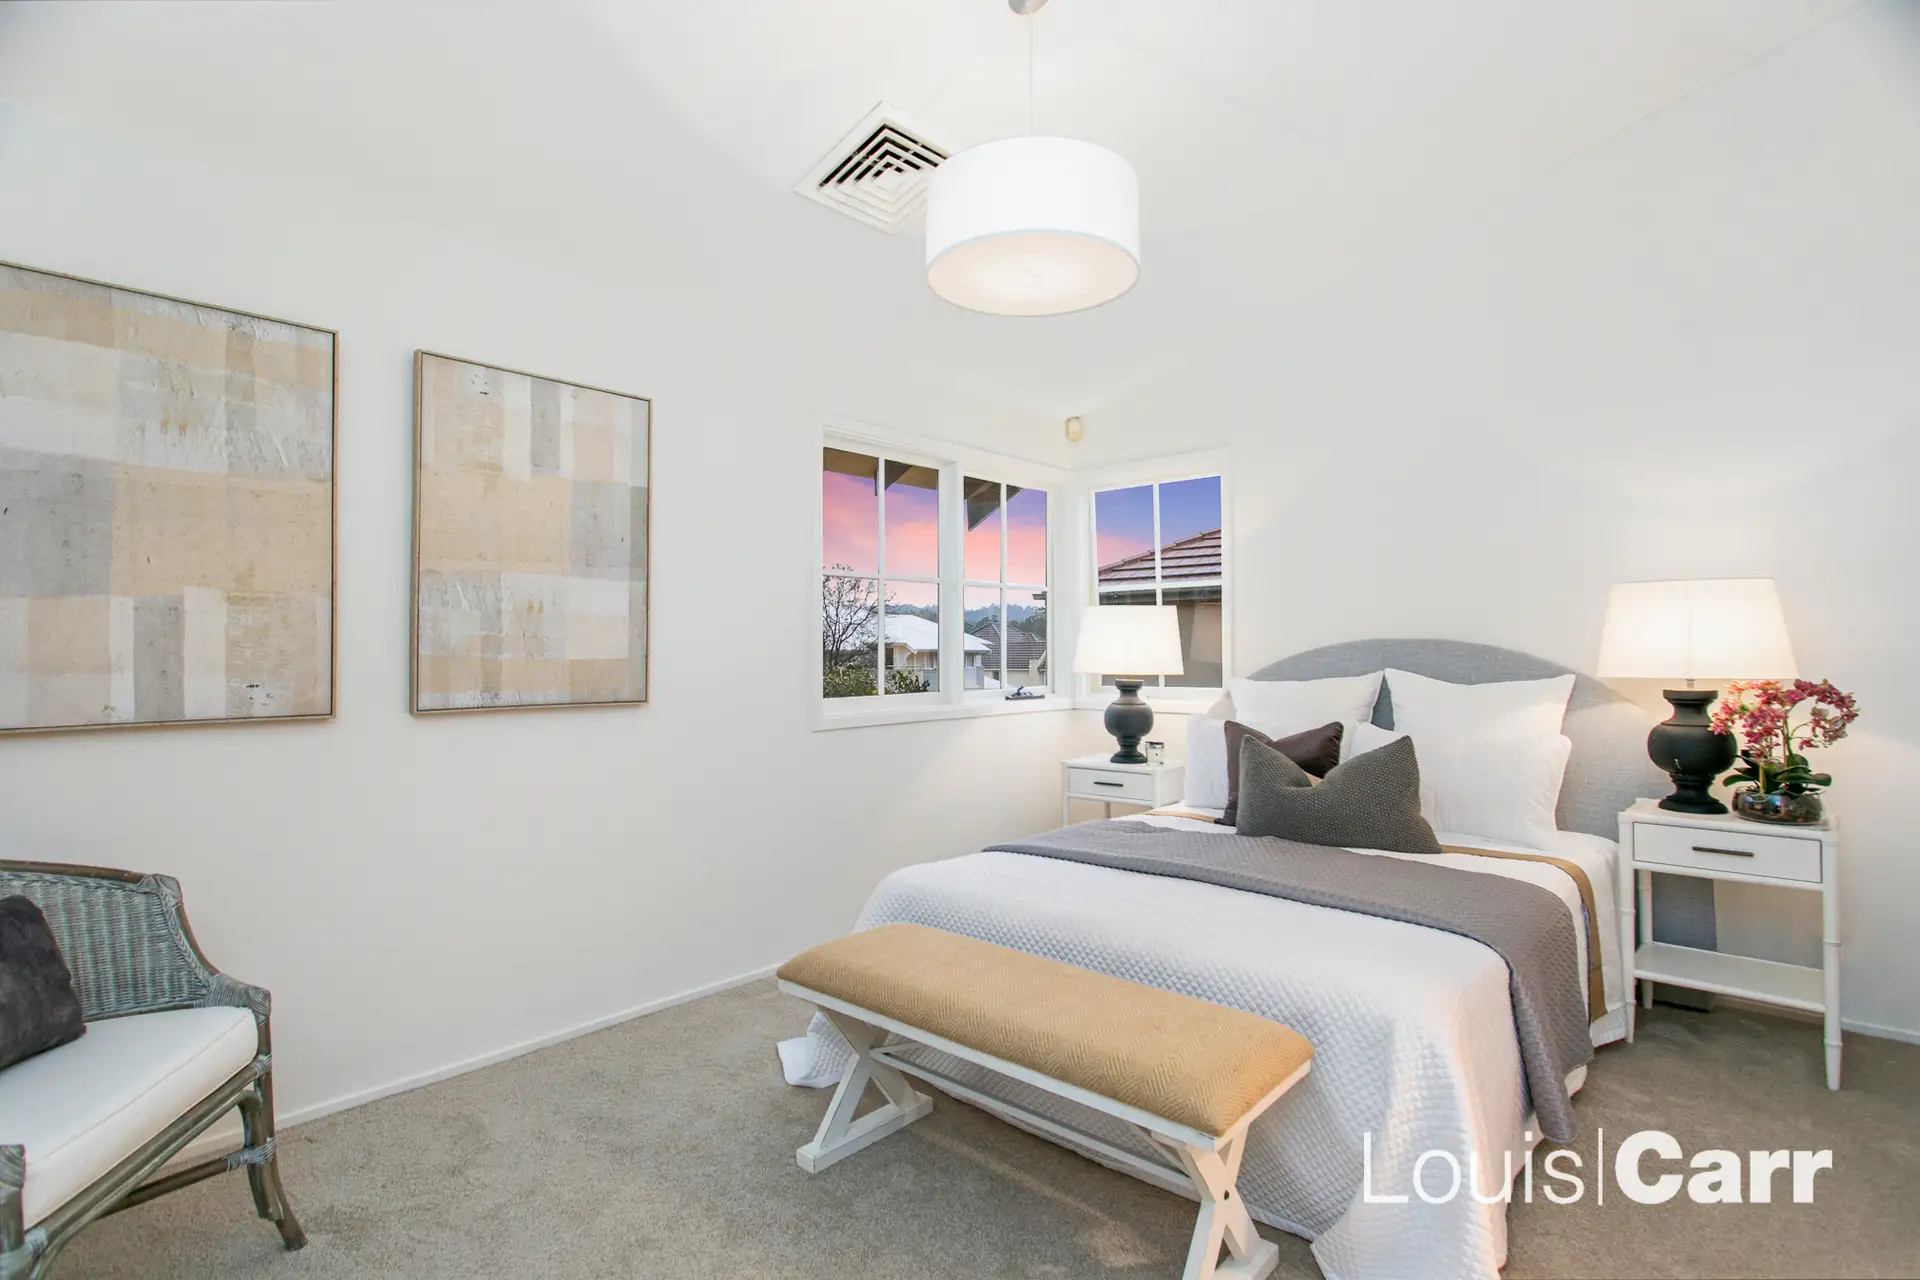 Photo #9: 7 Kambah Place, West Pennant Hills - Sold by Louis Carr Real Estate